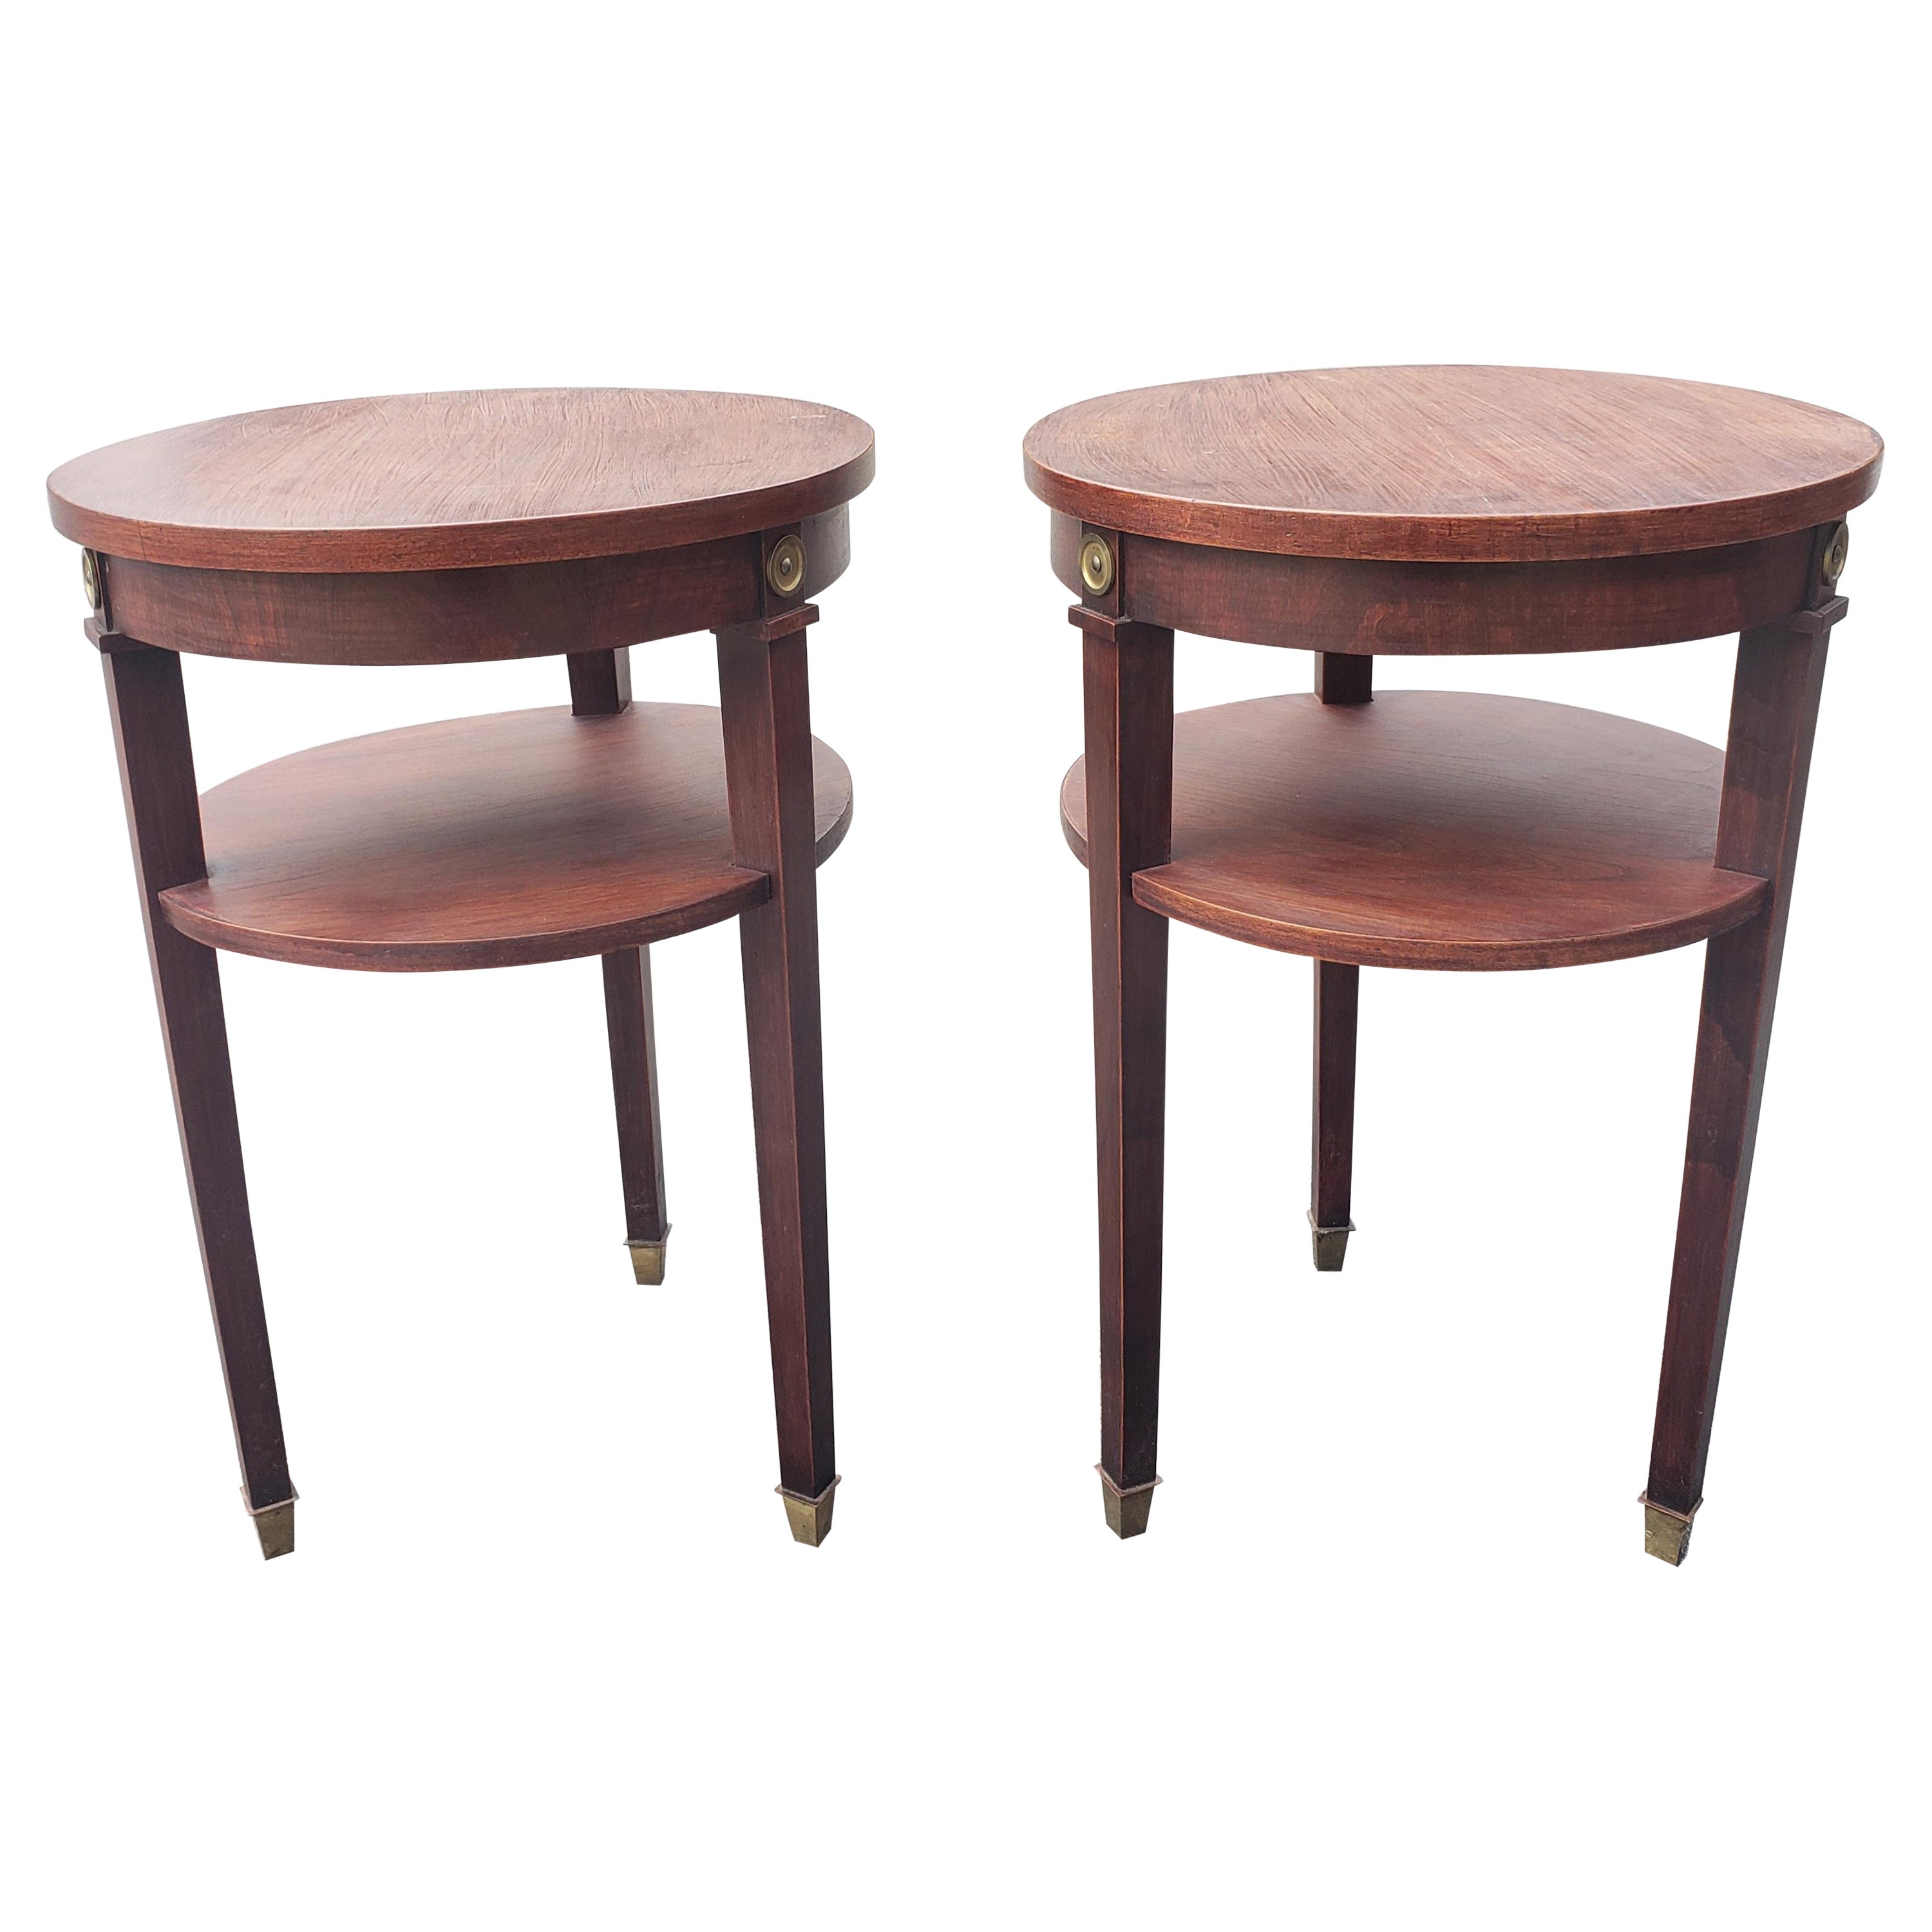 1950s Refinished Mahogany 2-Tier Round Candle Stand with Brass Capped Legs, Pair